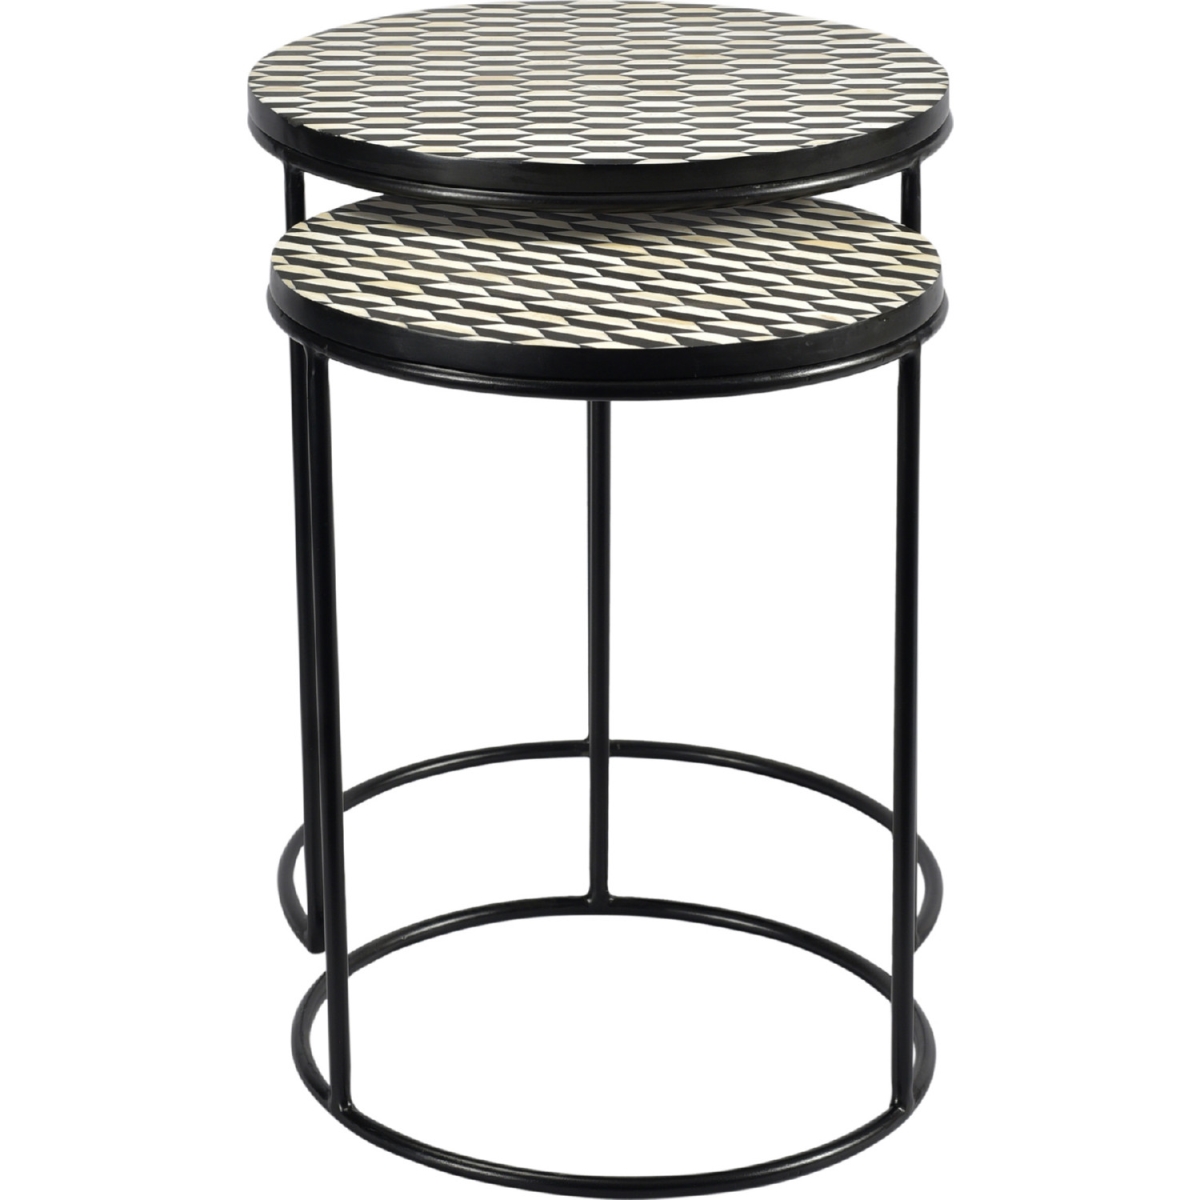 Gz-1009-43 Optic Nesting Tables - Brass, 18.5 X 16 X 16 In. - Set Of 2